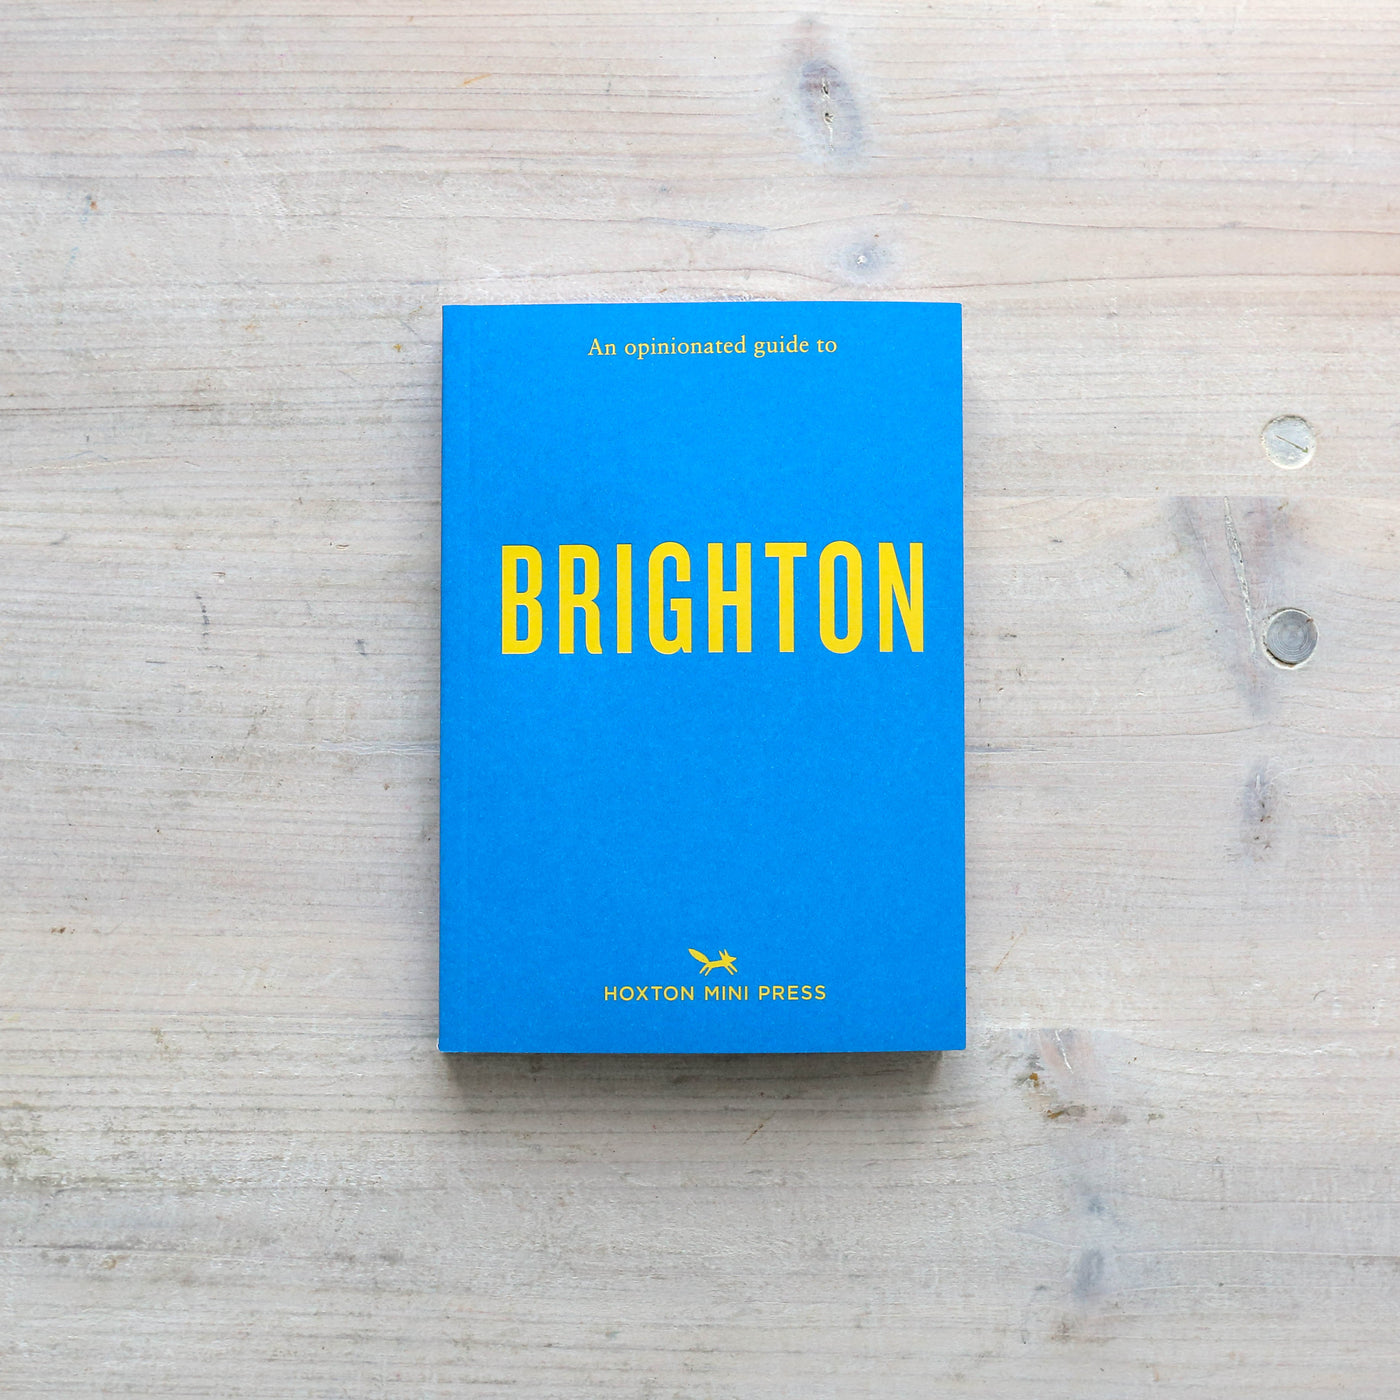 Brighton - An Opinionated Guide